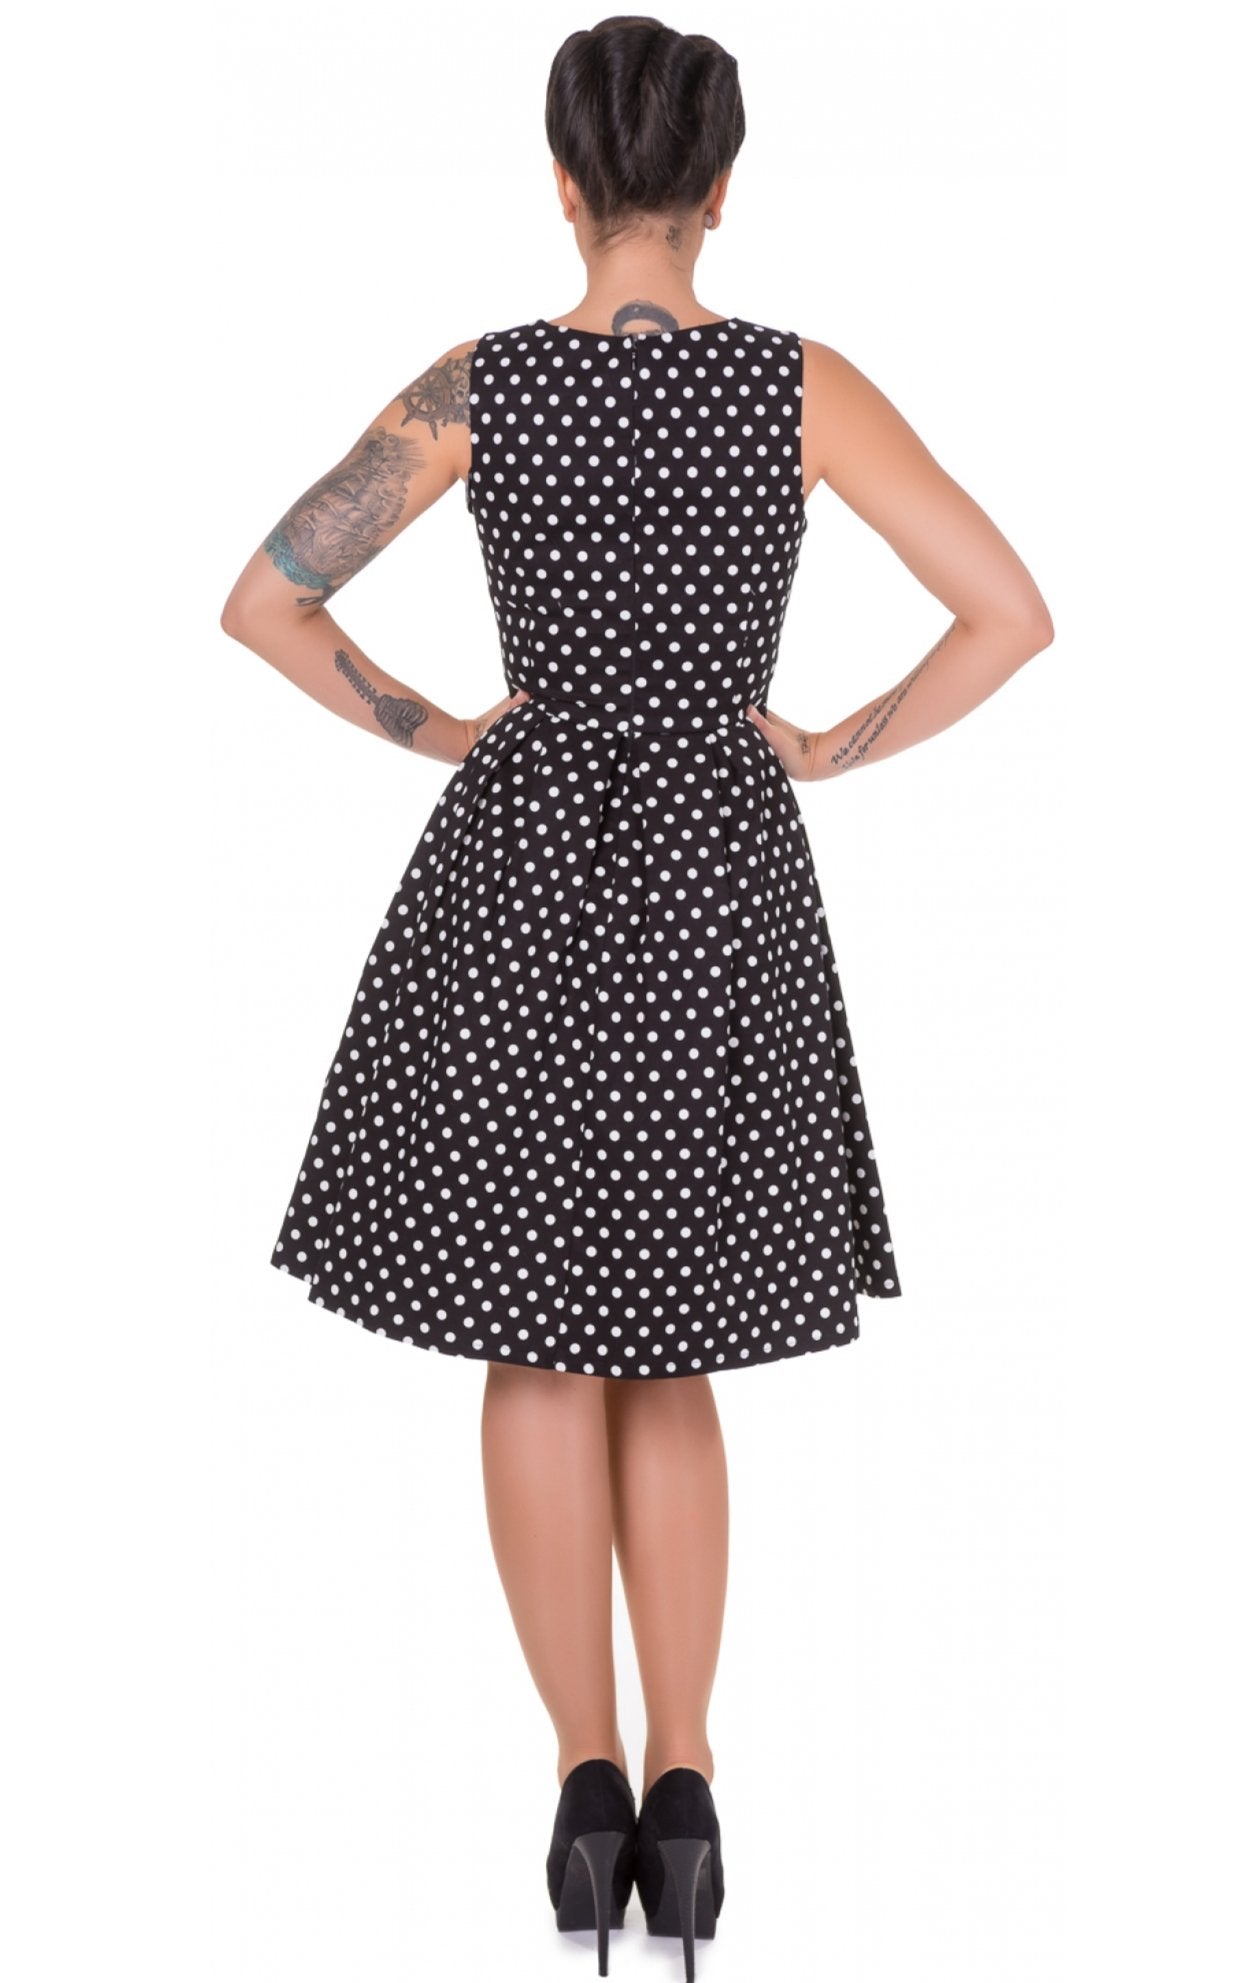 Model wears our sleeveless Lola dress in black, with white polka dots, back view